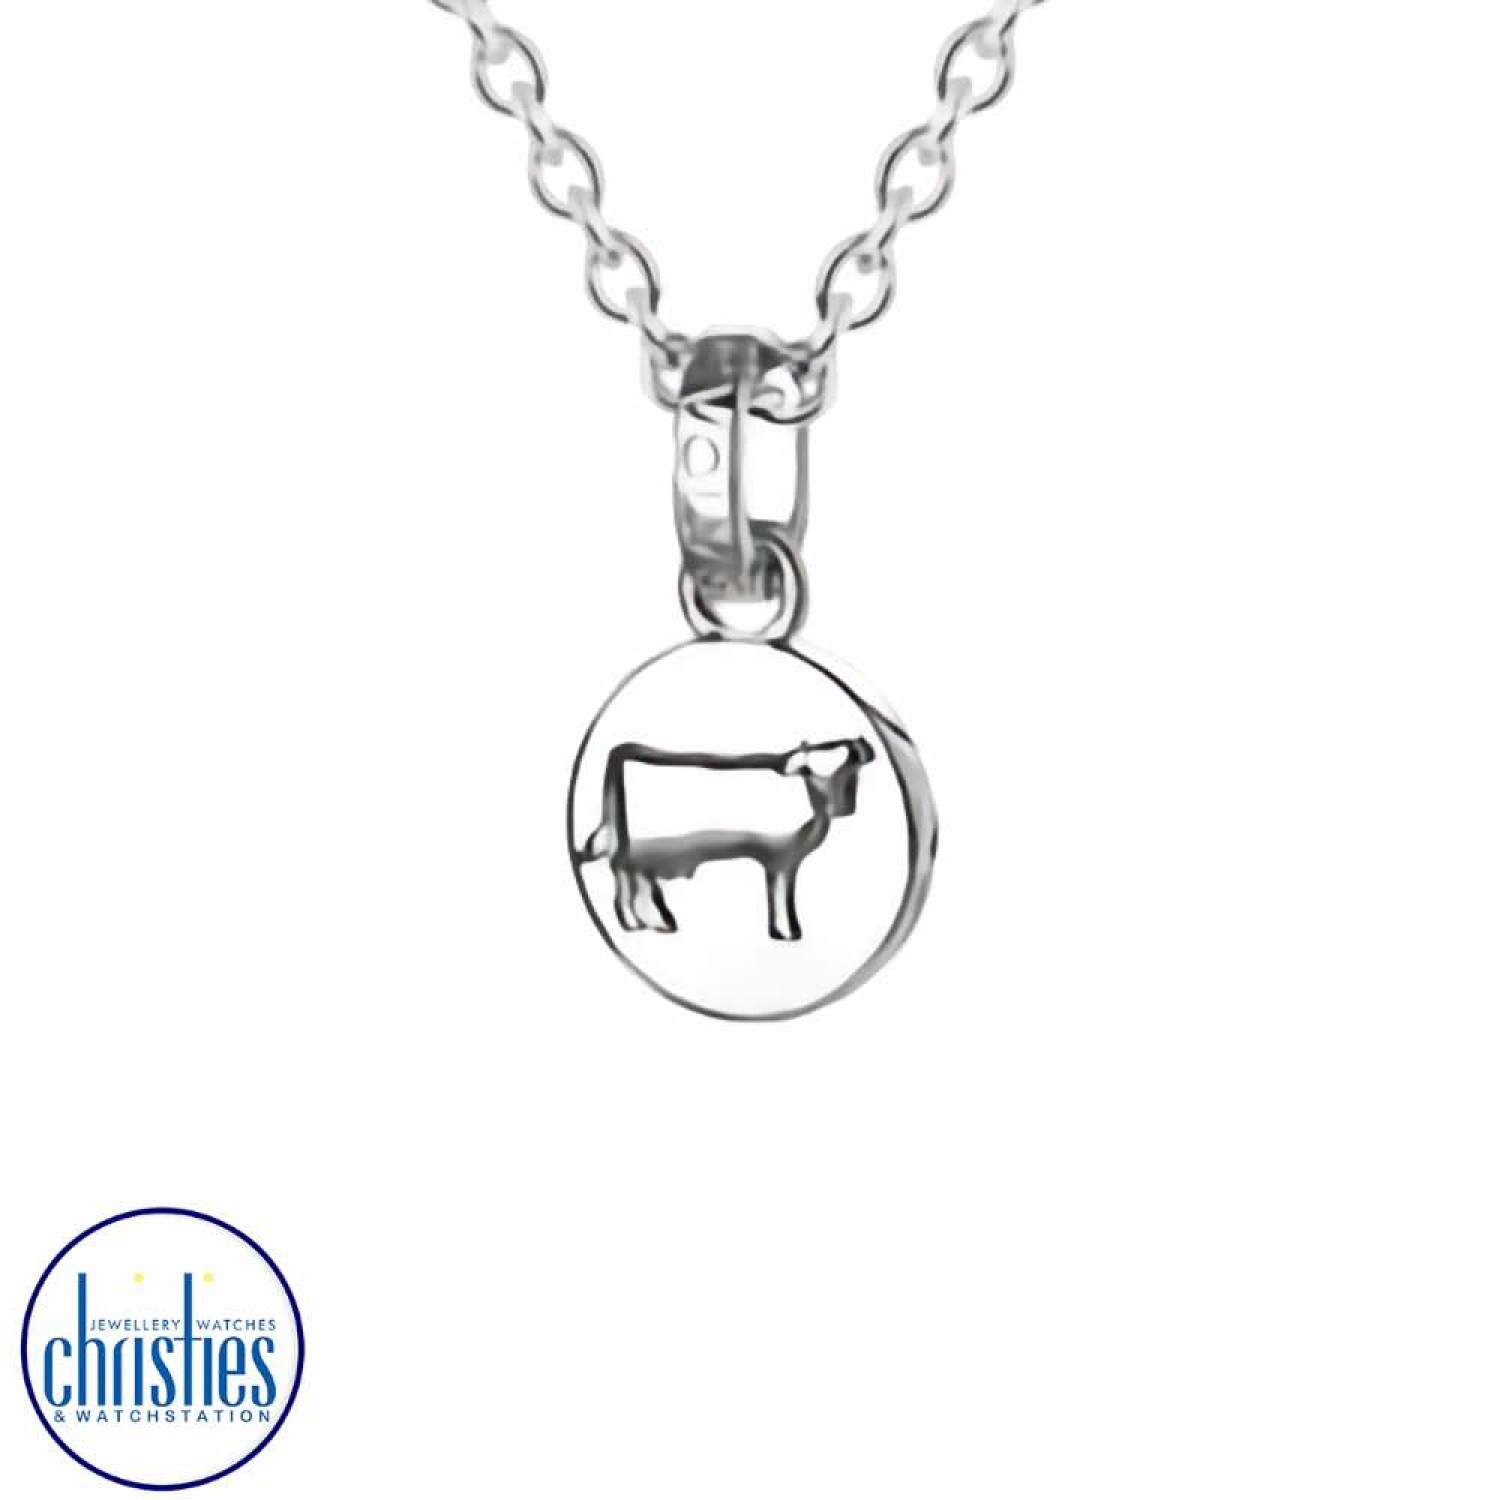 Cow Jewellery Silver Cow Pendant Necklace. Evolve's beautiful Cow pendant necklace symbolises this gracious and gentle animal featured so predominately in the green fields of Aotearoa. horseshoe jewellery nz